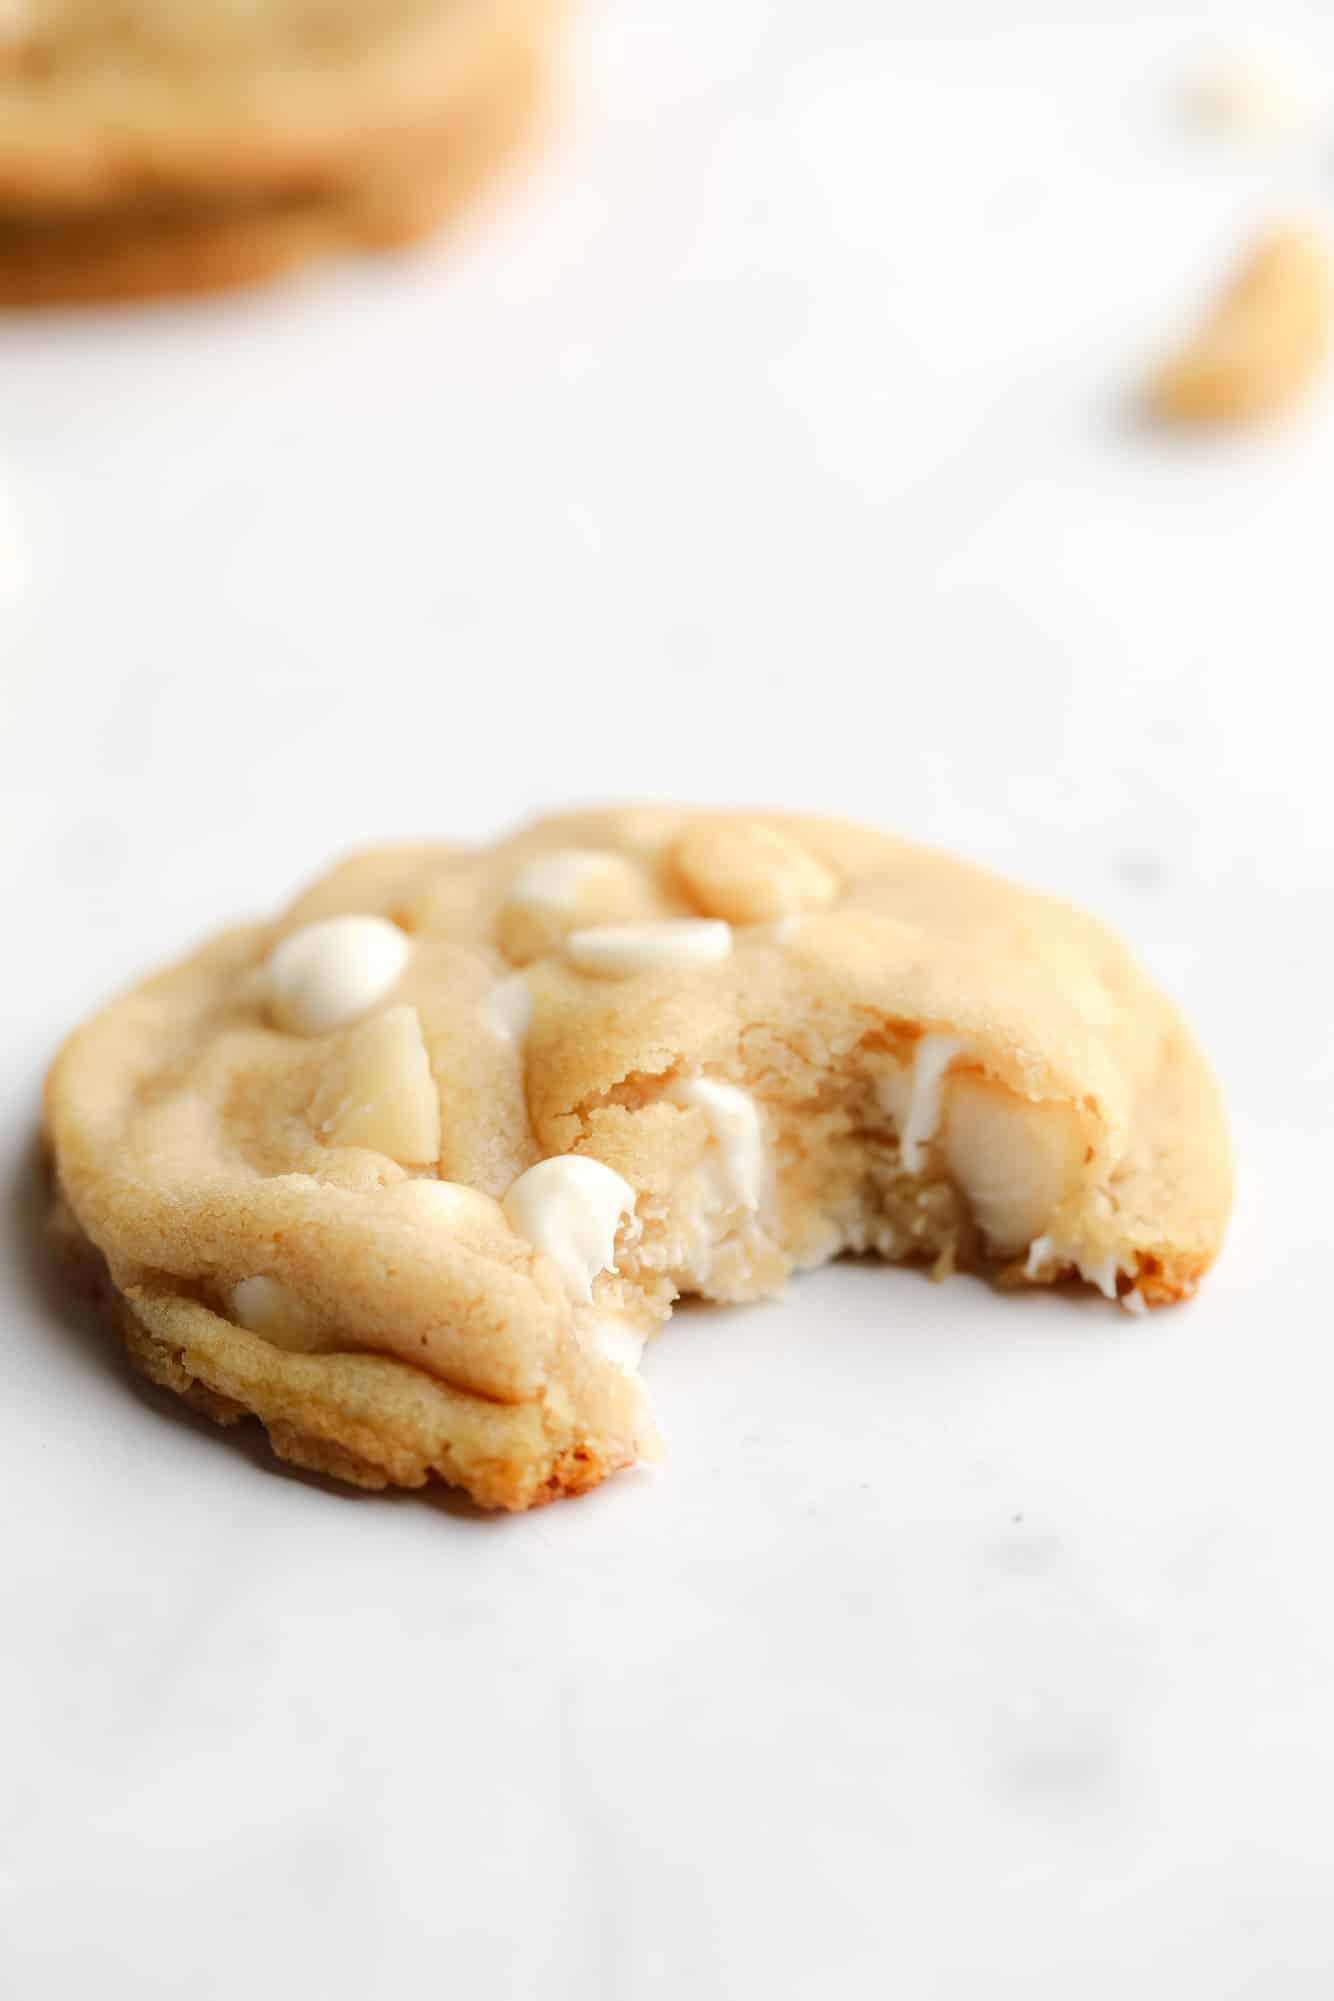 close up on a Vegan White Chocolate Macadamia Nut Cookie with a bite taken out of it.